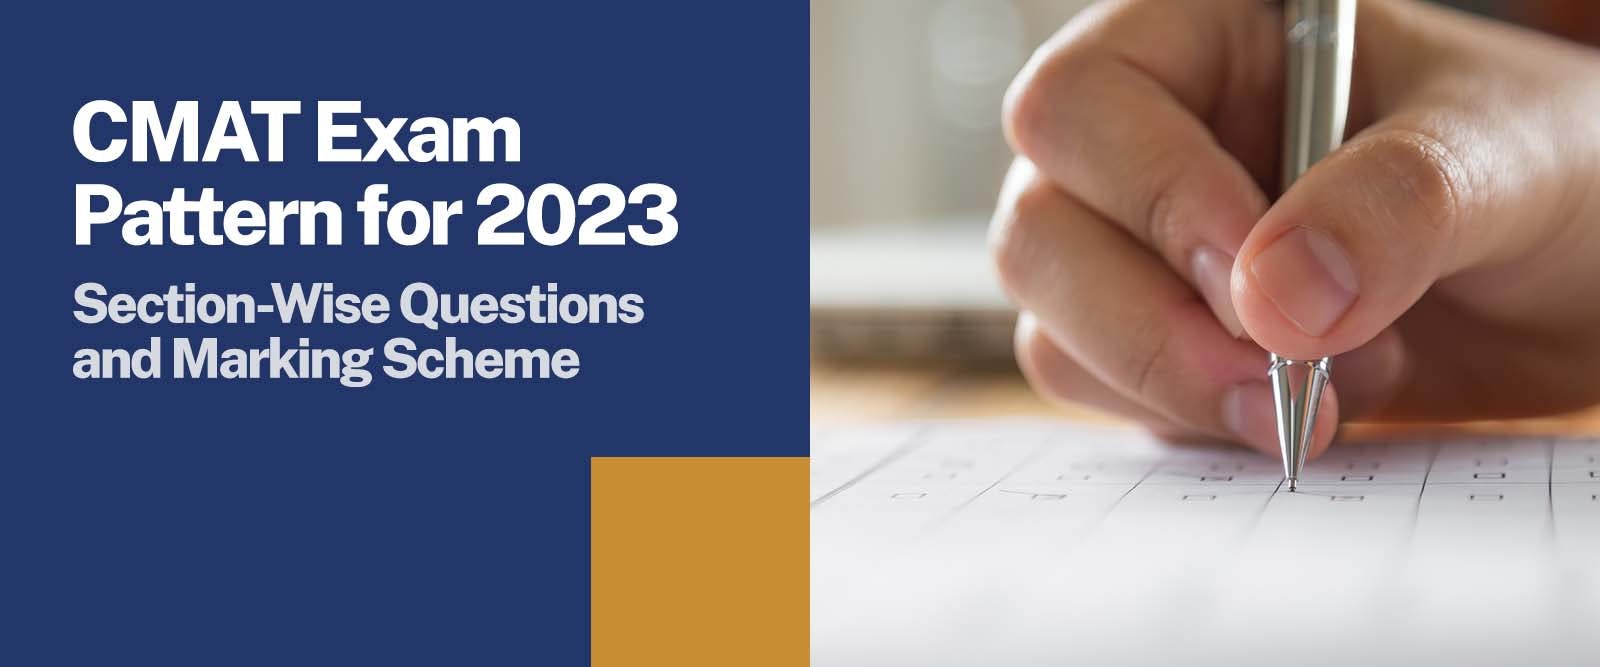 Exam Pattern For CMAT 2023